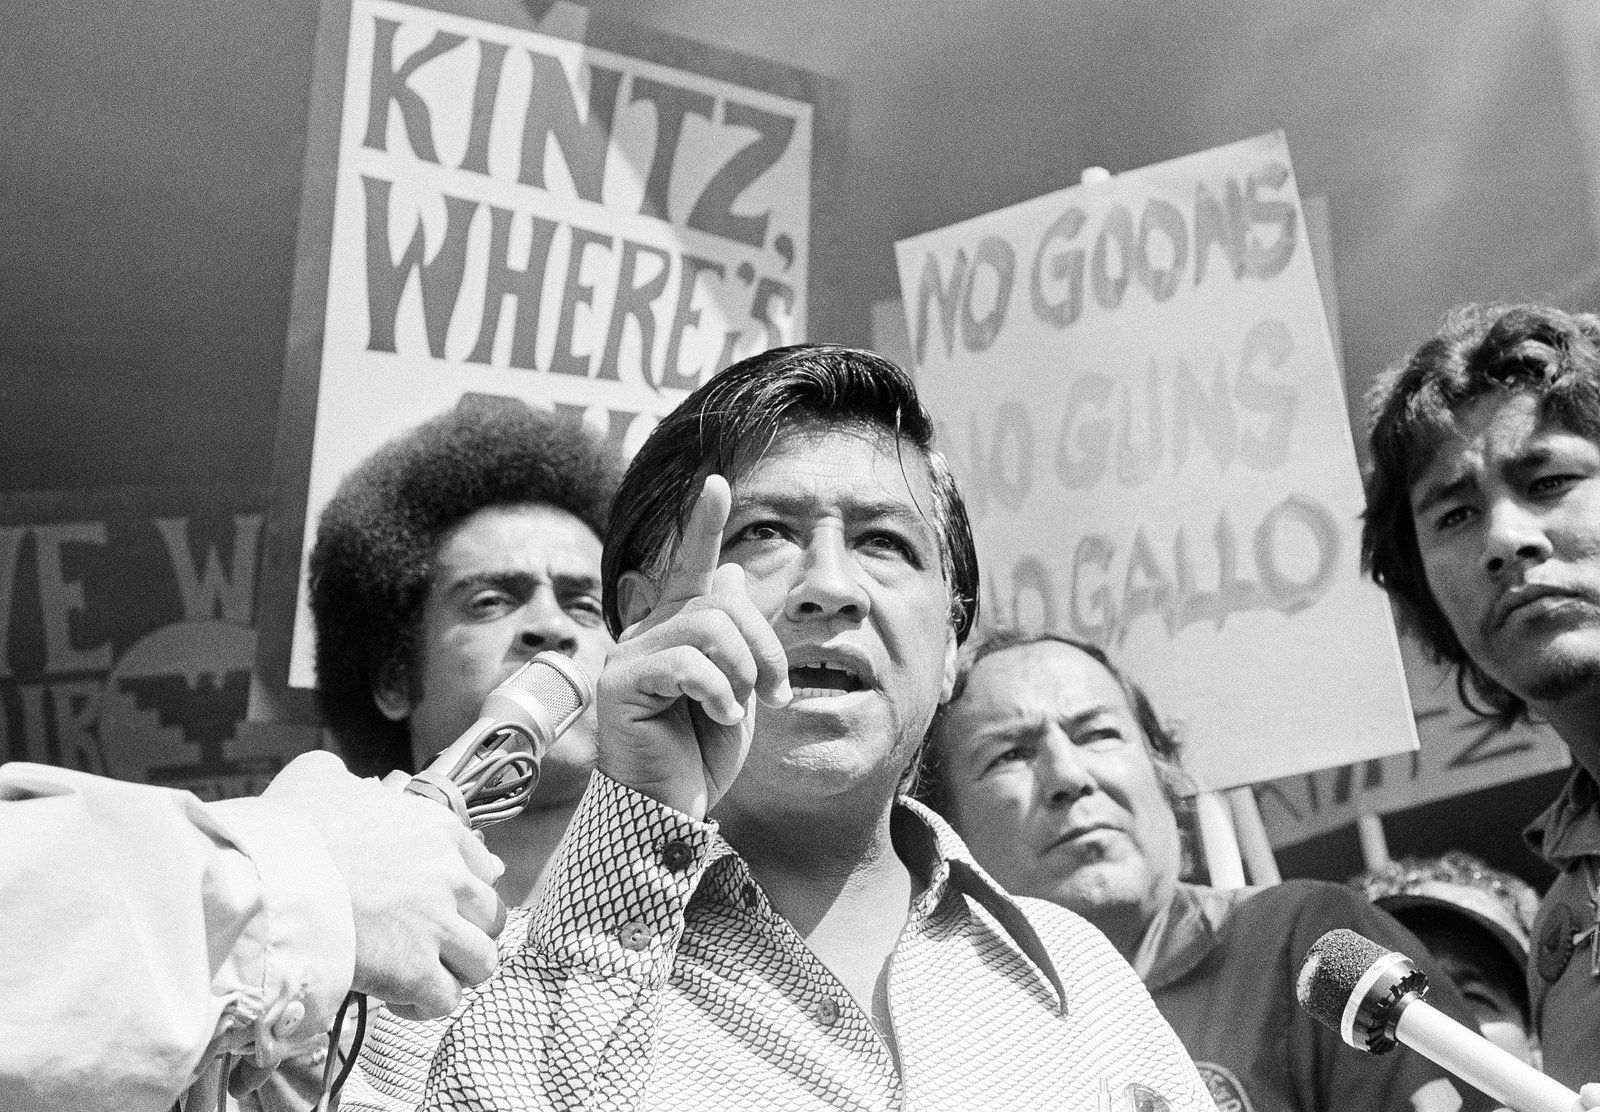 Cesar Chavez, the head of the United Farm Workers Union, calls for the resignation of Walter Kintz, the first legal counsel for the state Agriculture Labor Relations Board, in Sacramento, Calif., on Sept. 16, 1975. Chavez's efforts in California culminated in landmark legislation that protected the rights of the state's farmworkers and created the ALRB. AP